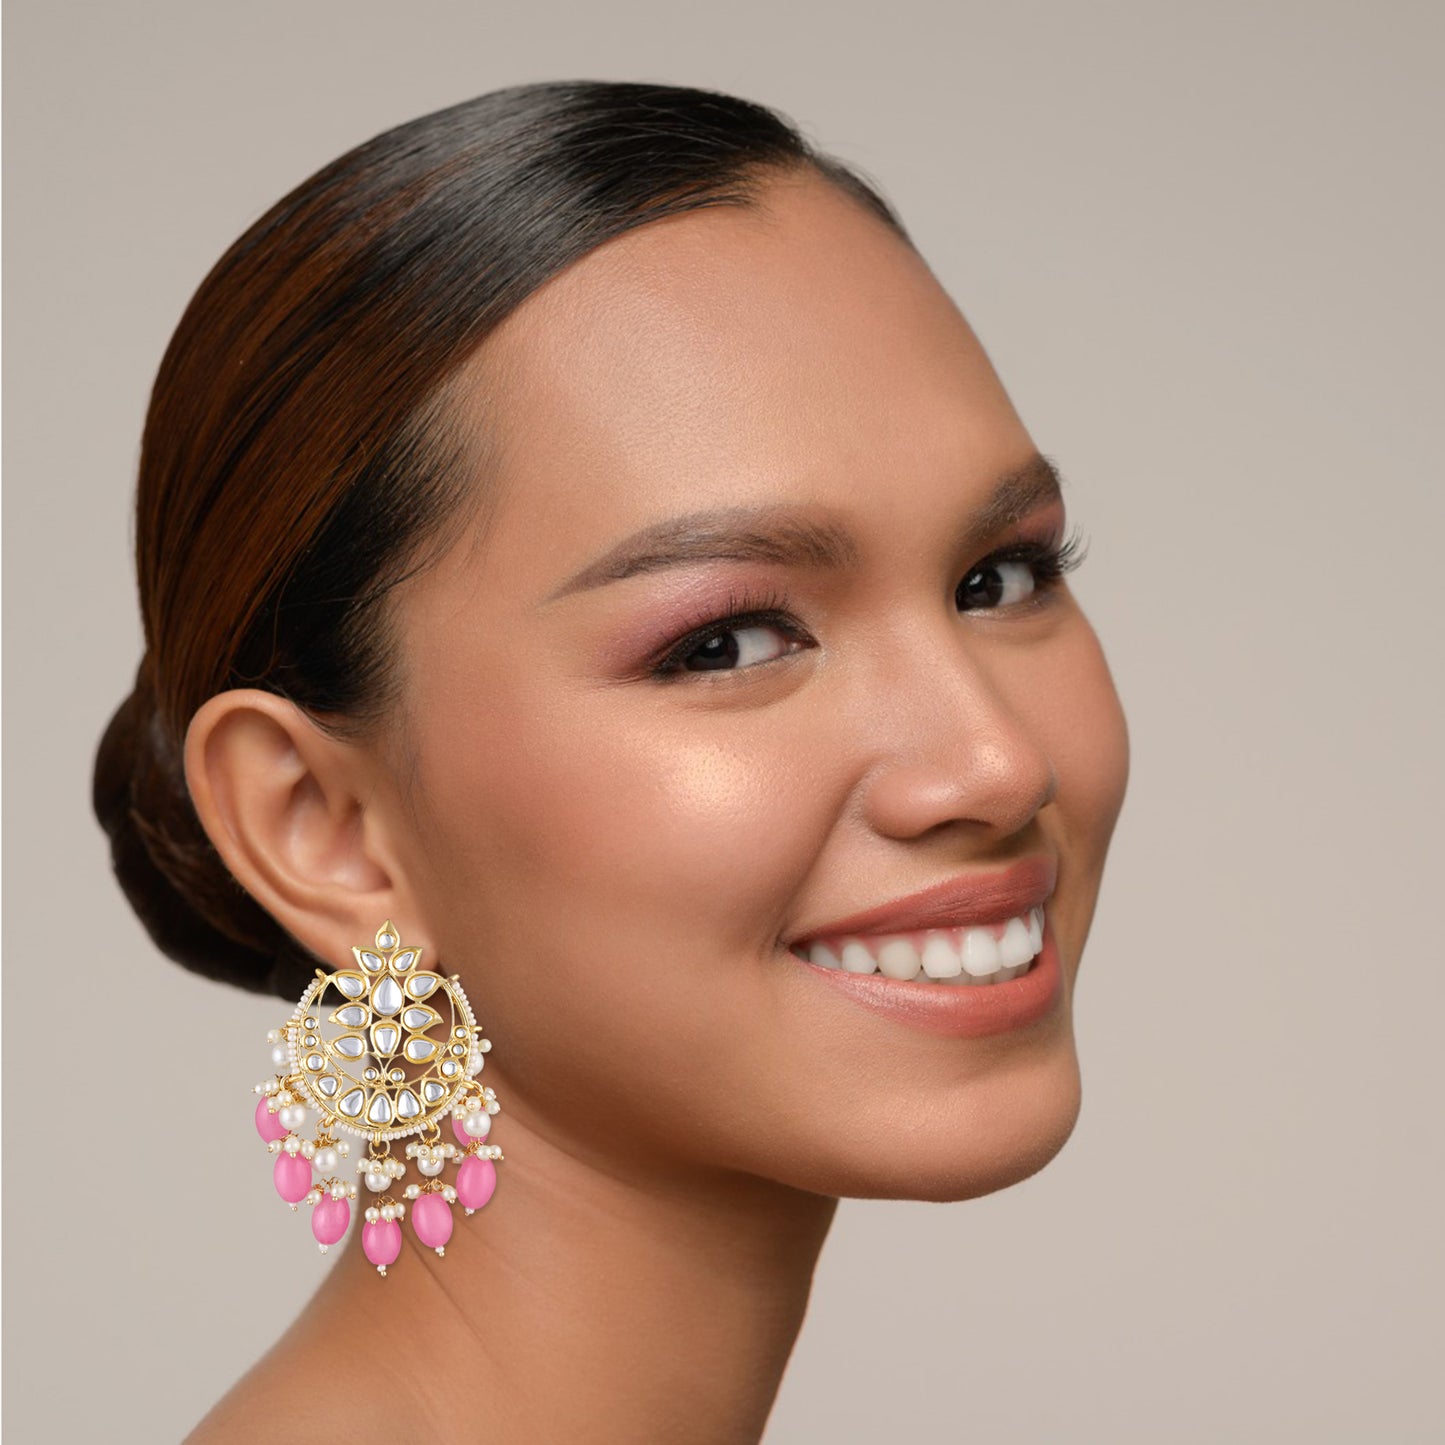 Bdiva 18K Gold Plated Kundan Earrings with Pink Semi Cultured Pearls.